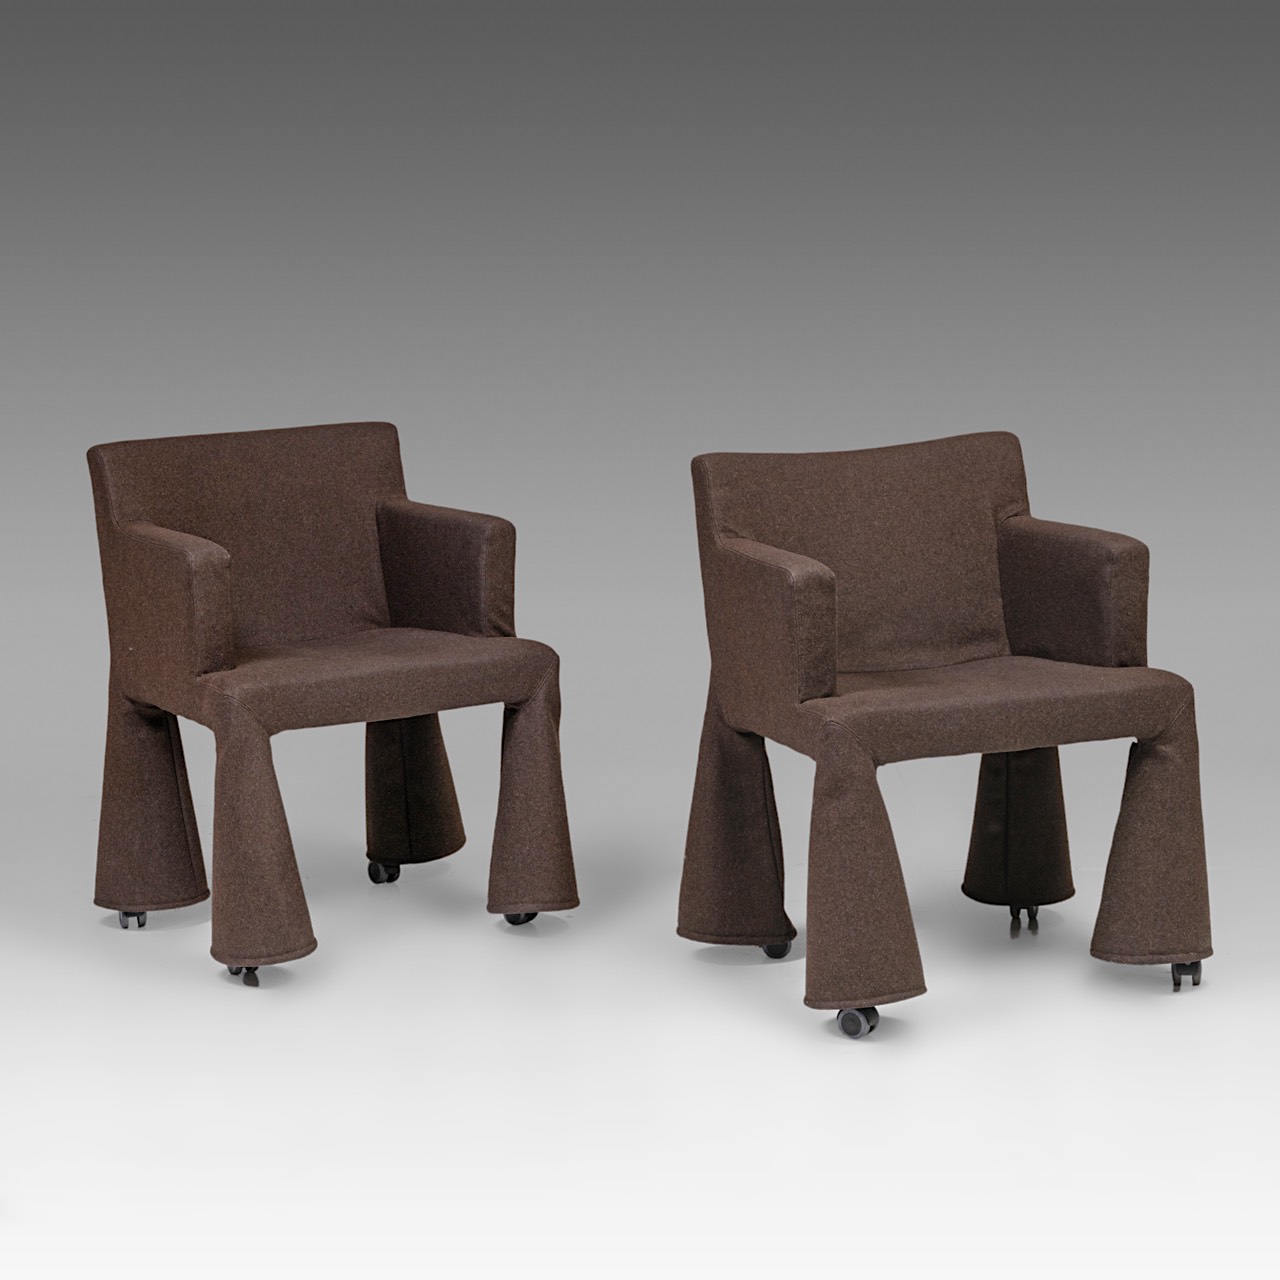 A pair of 'VIP' chairs by Marcel Wanders, the Netherlands, 2000, H 82 - W 60 cm - Image 2 of 9